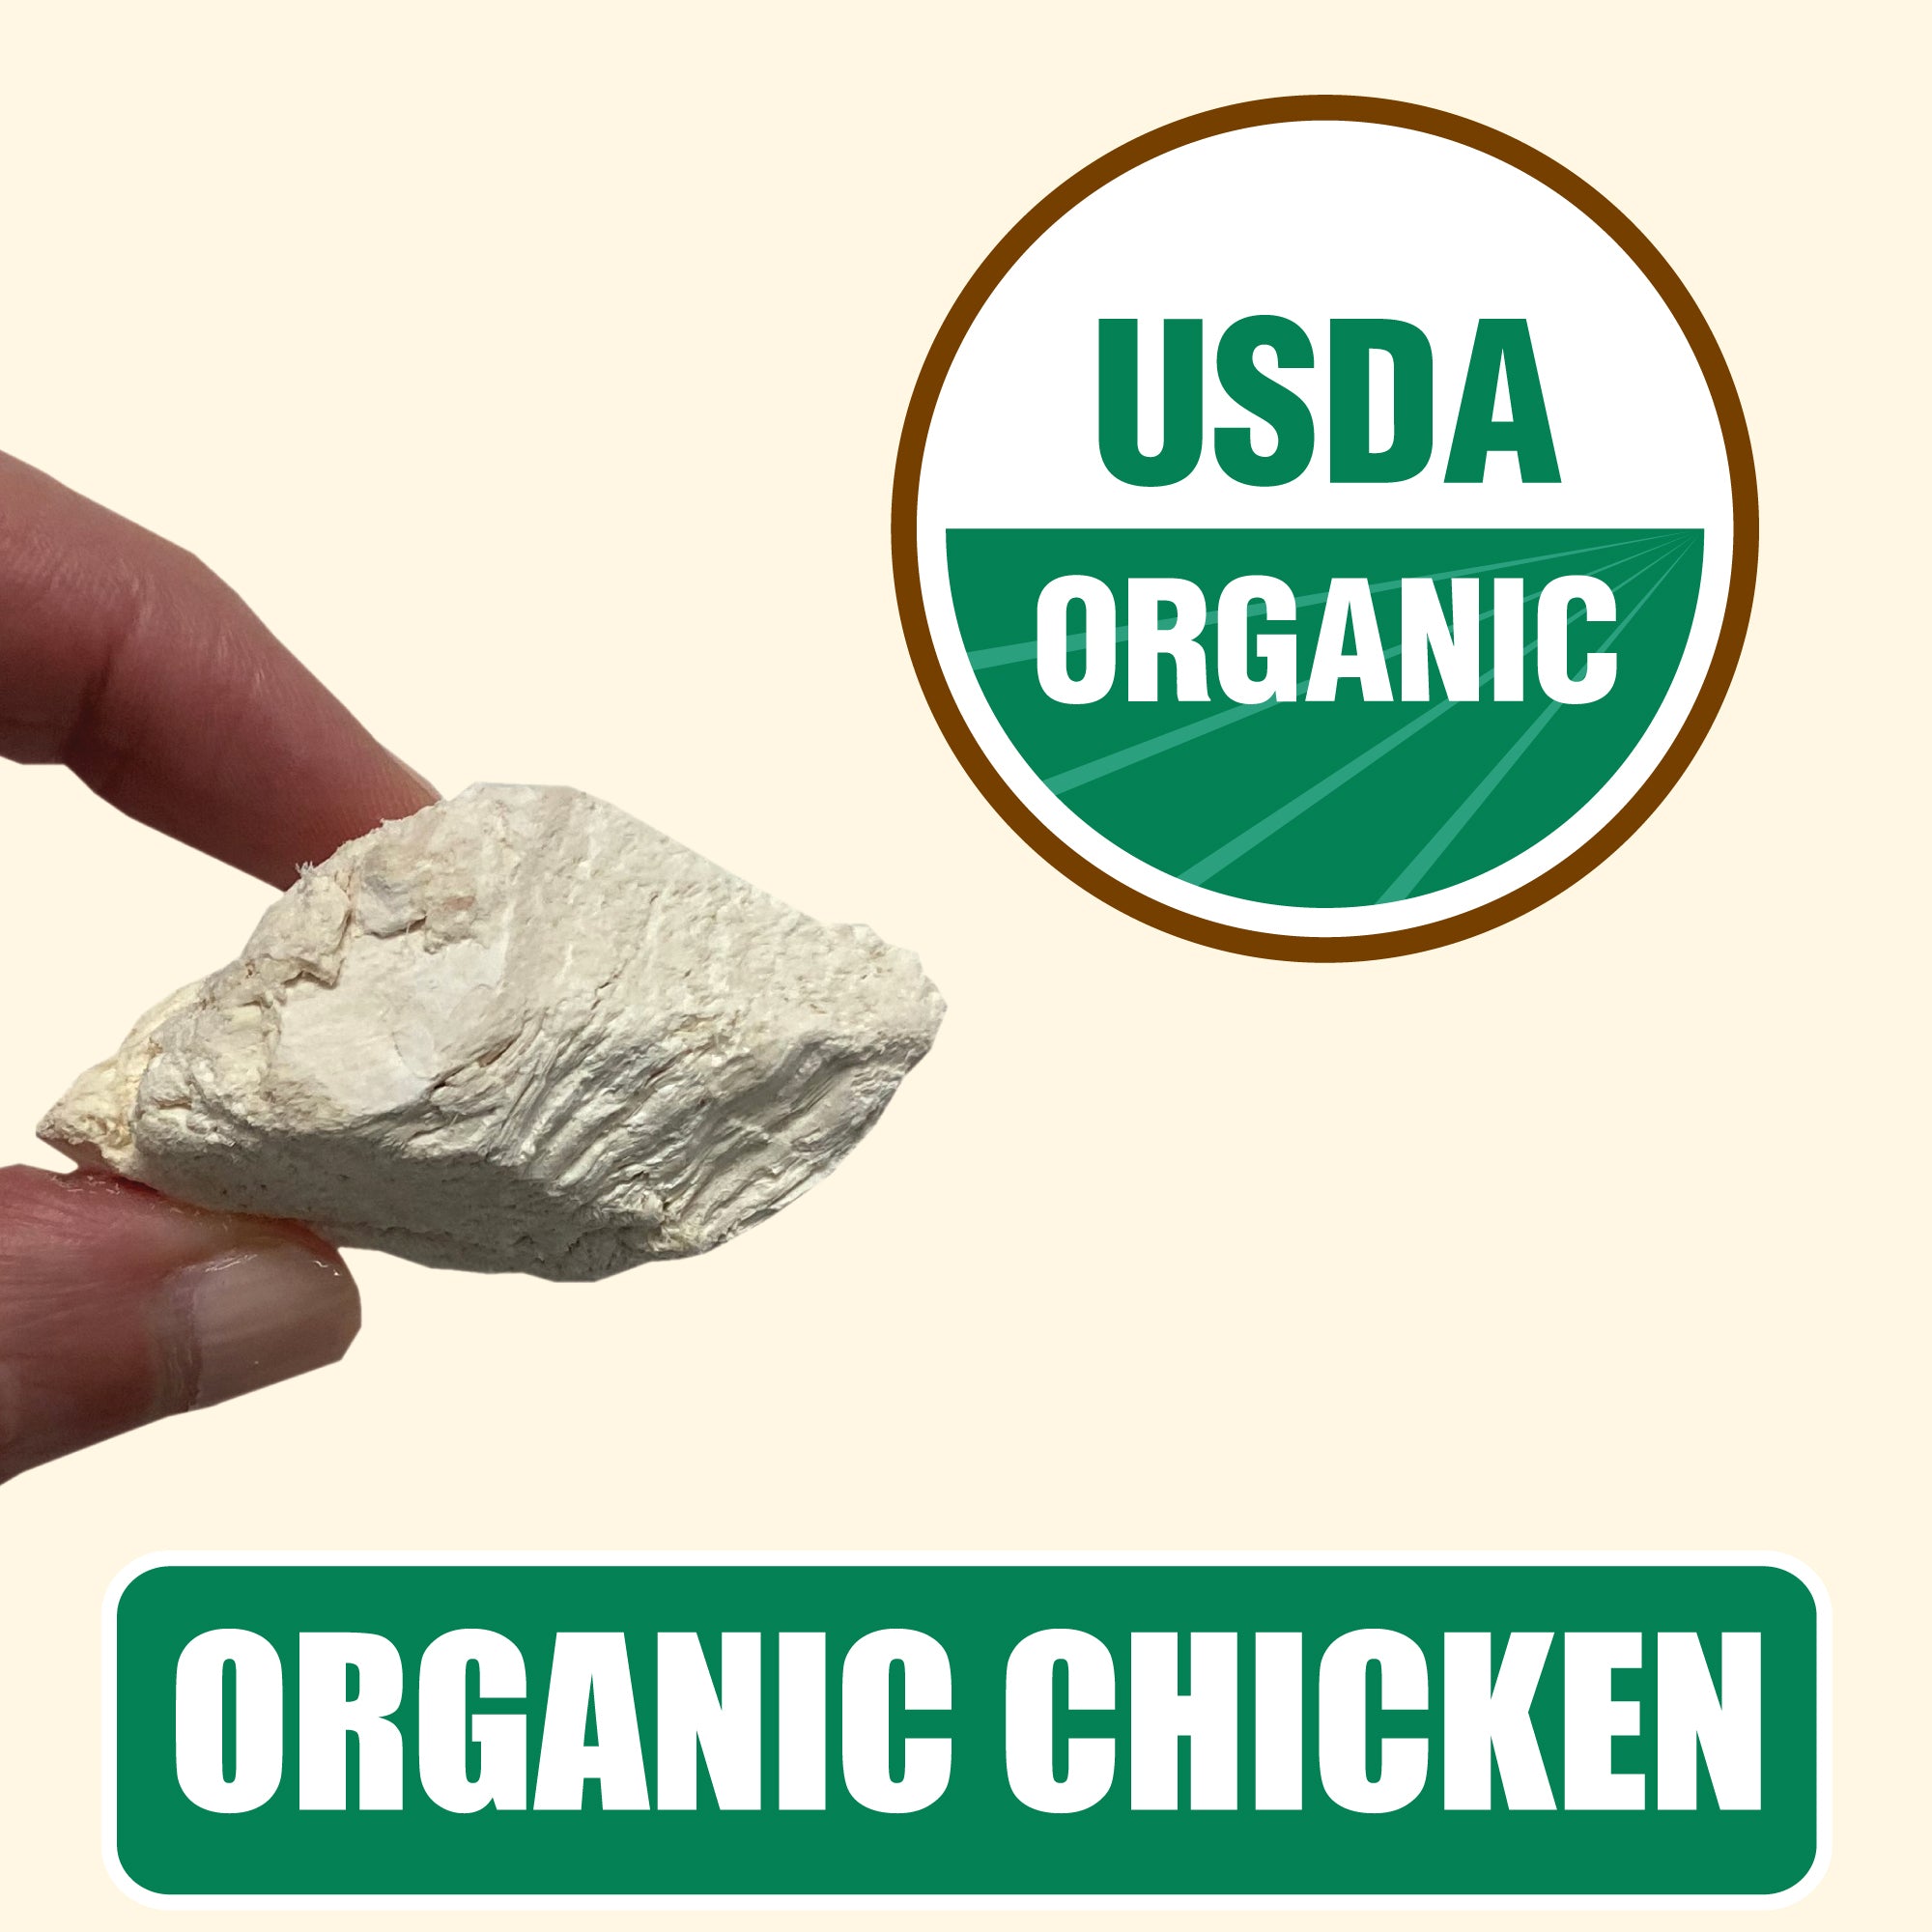 Organic Chicken Treats For Dogs